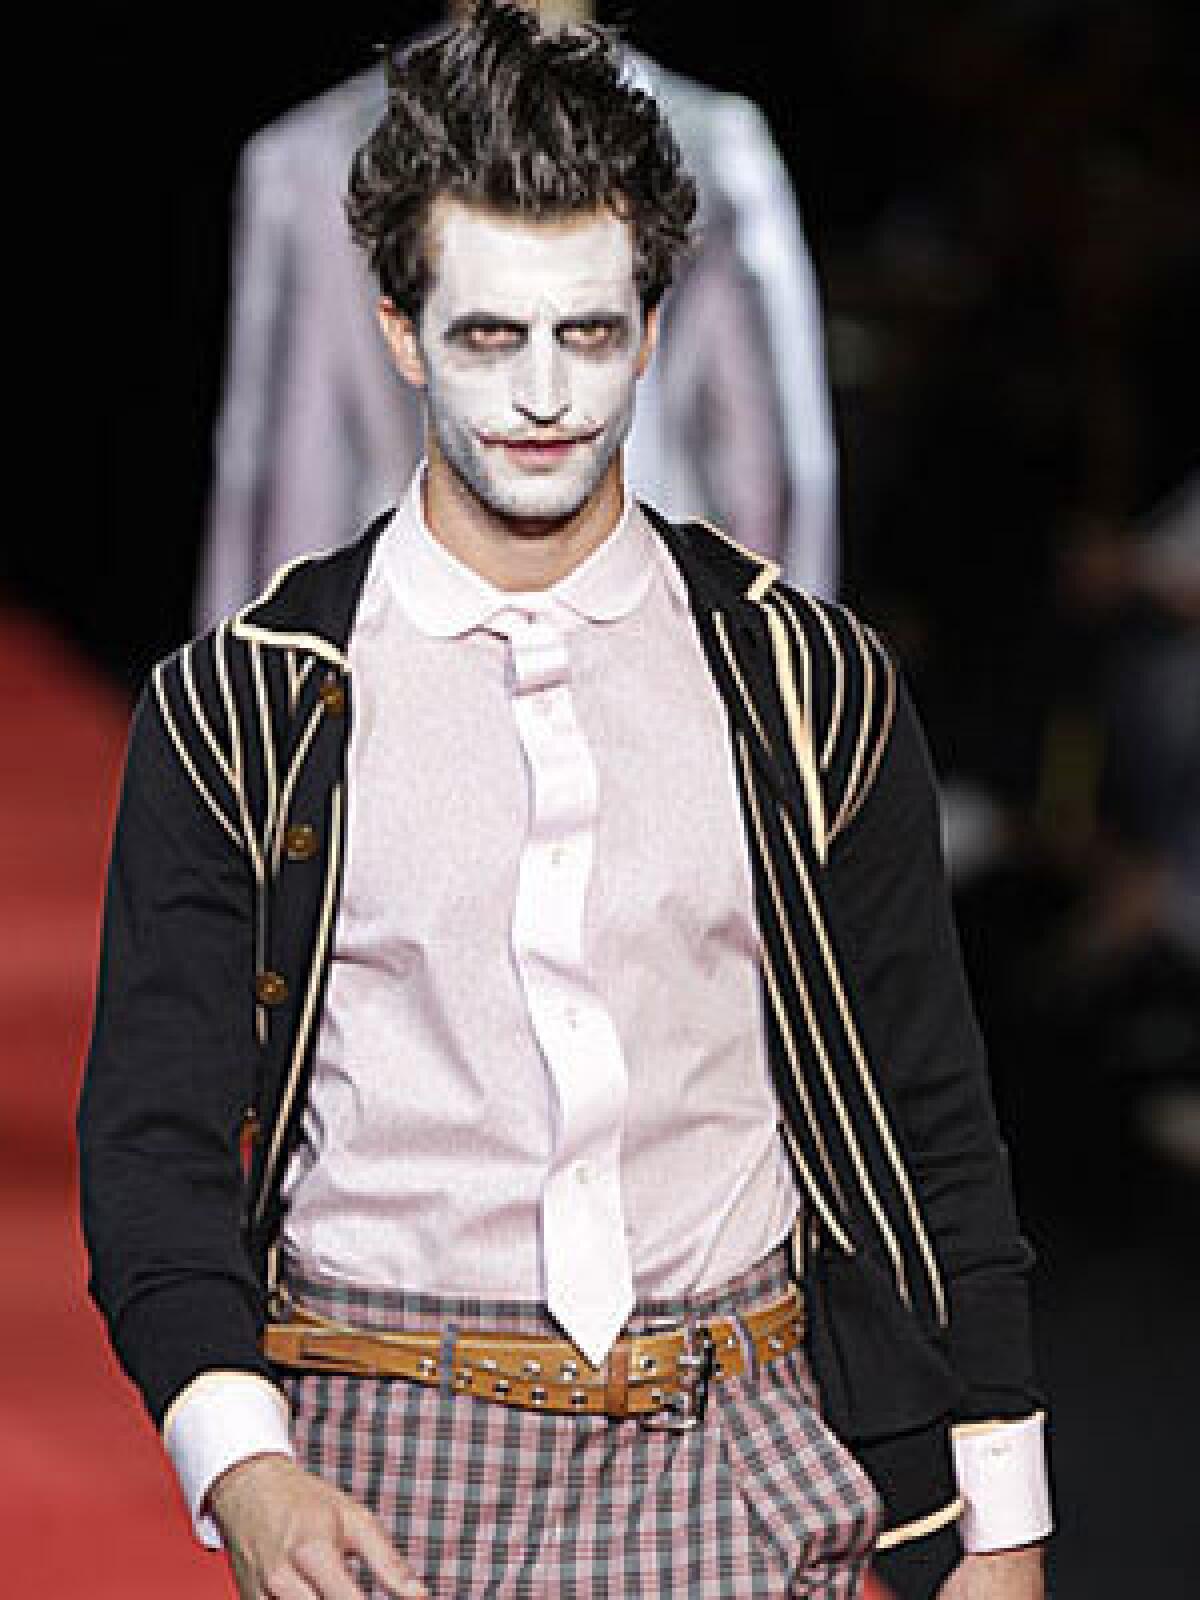 VIVIENNE WESTWOOD: Joker-like makeup mixes with an Old Hollywood aesthetic.